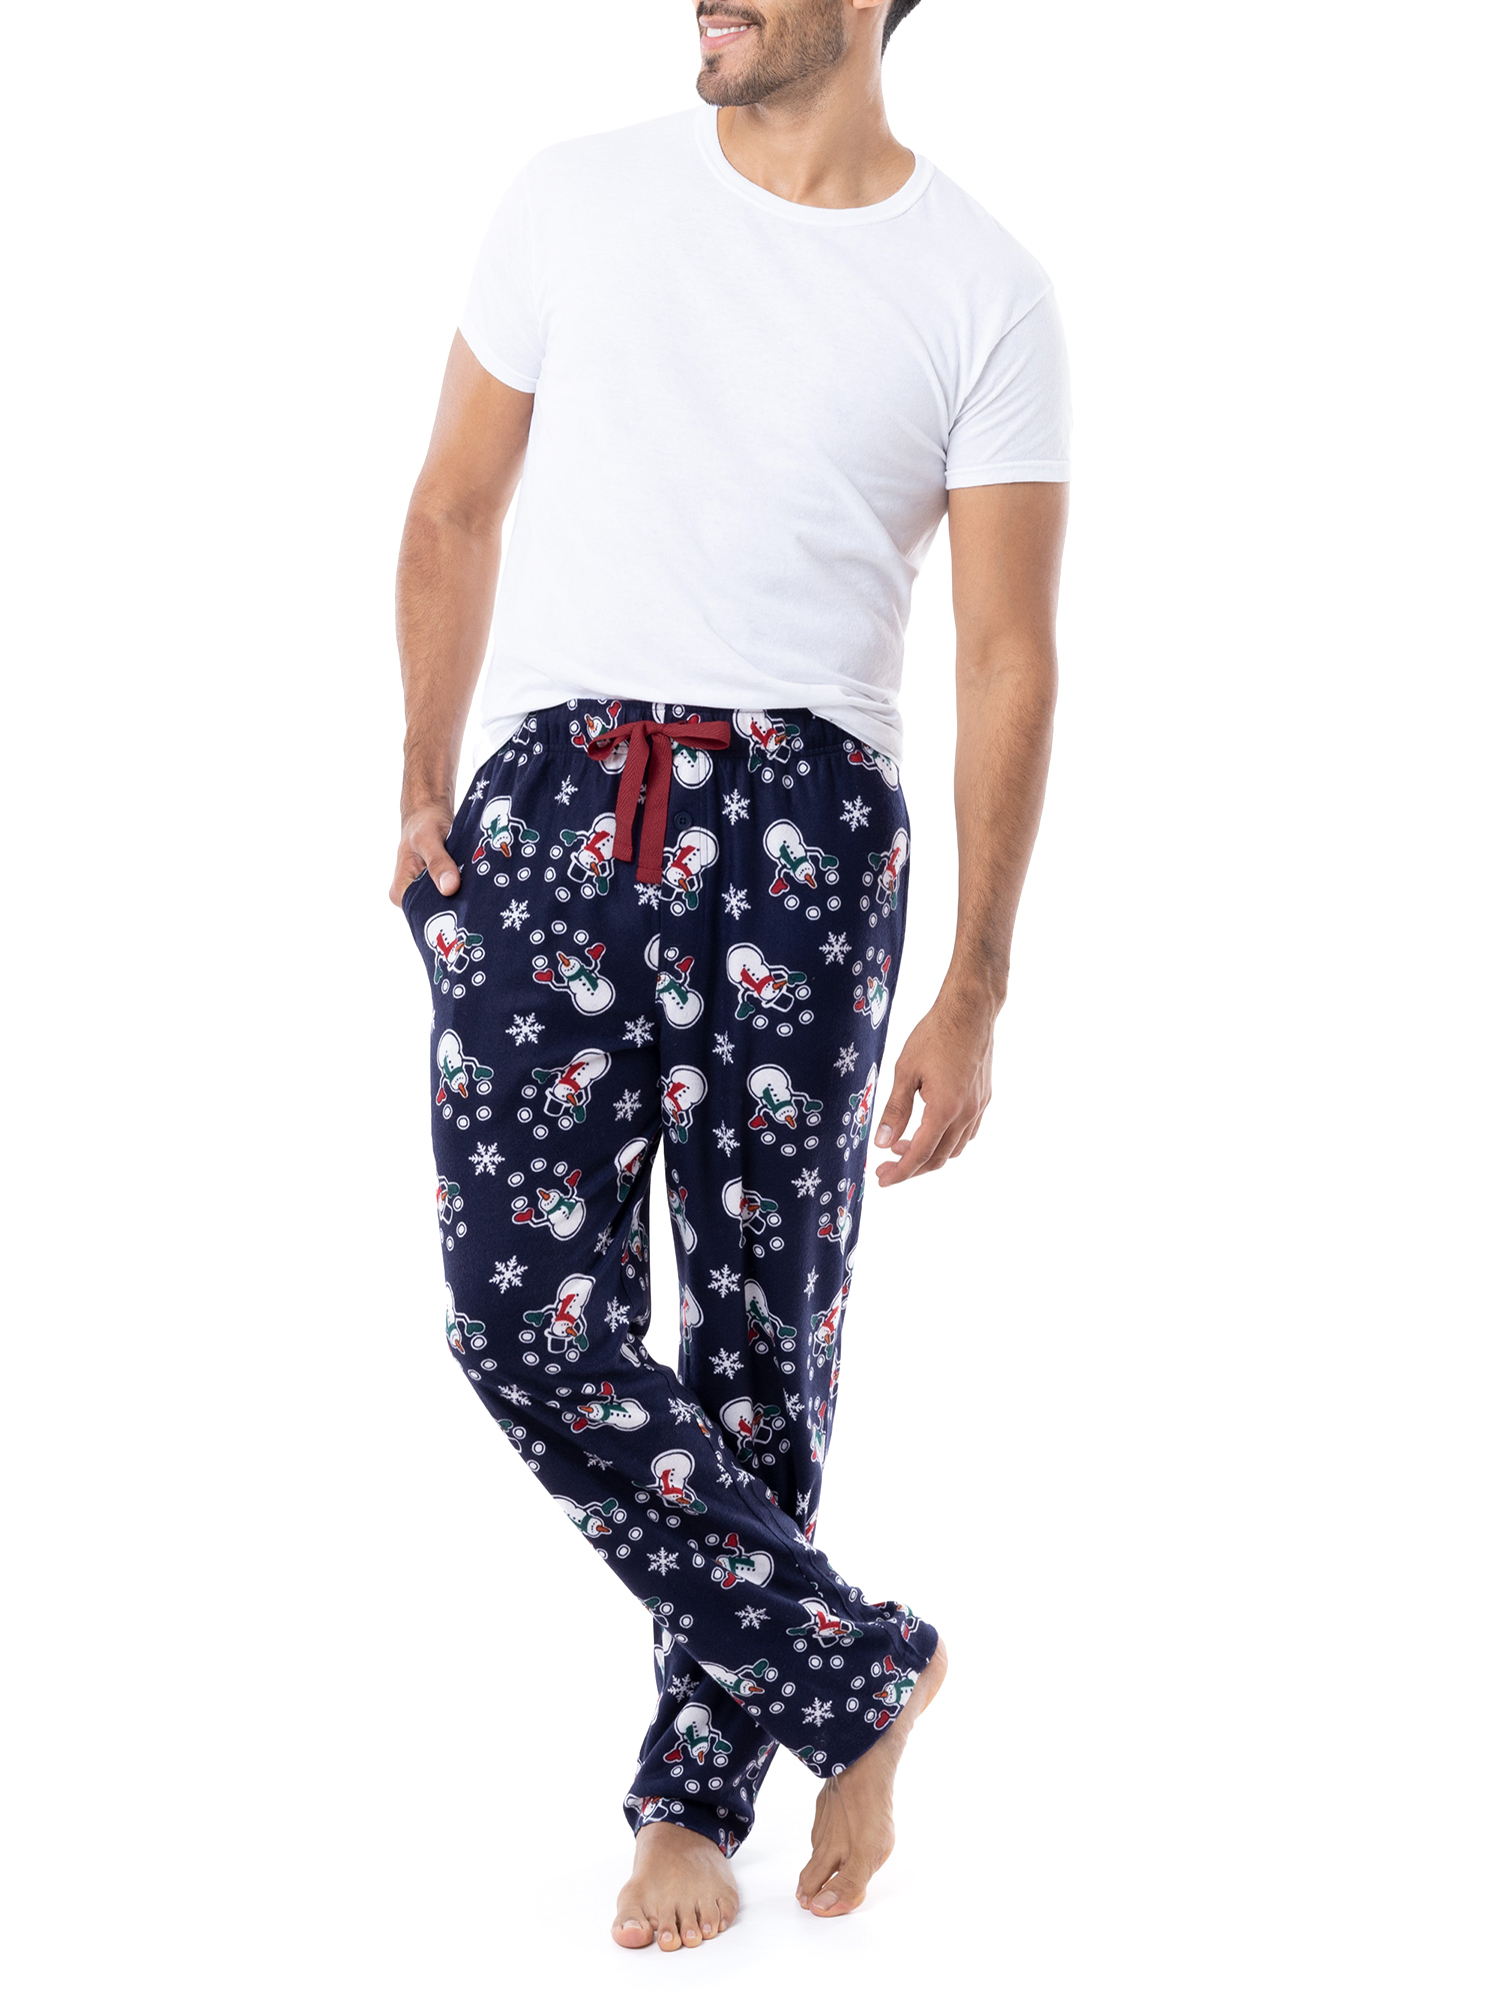 Fruit of the Loom Men's Holiday and Plaid Print Soft Microfleece Pajama Pant 2-Pack Bundle - image 12 of 15